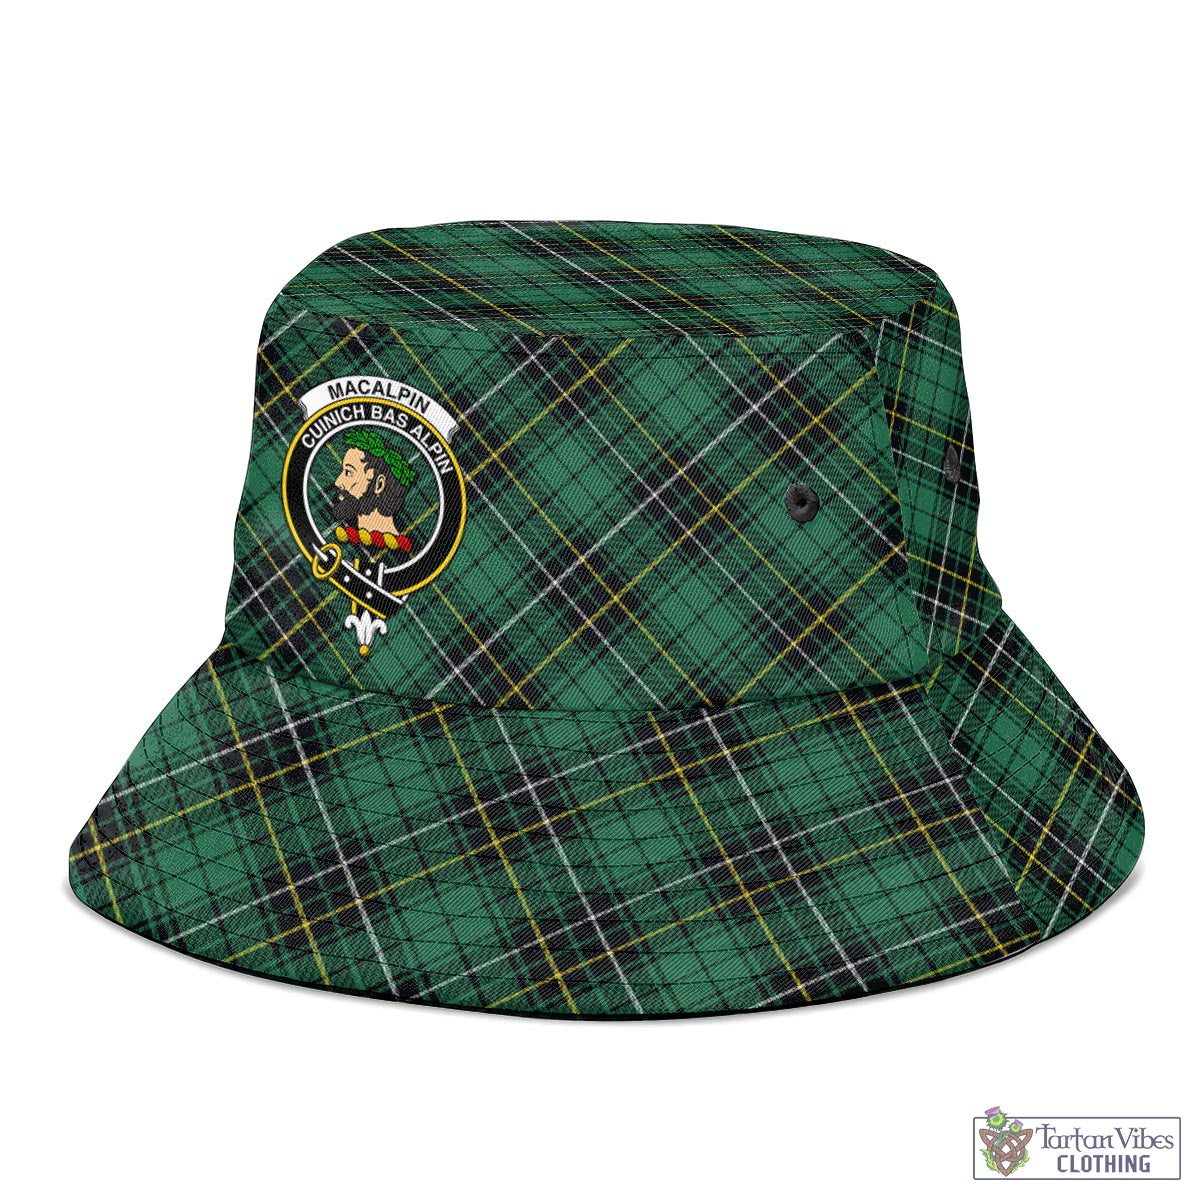 Tartan Vibes Clothing MacAlpin Ancient Tartan Bucket Hat with Family Crest